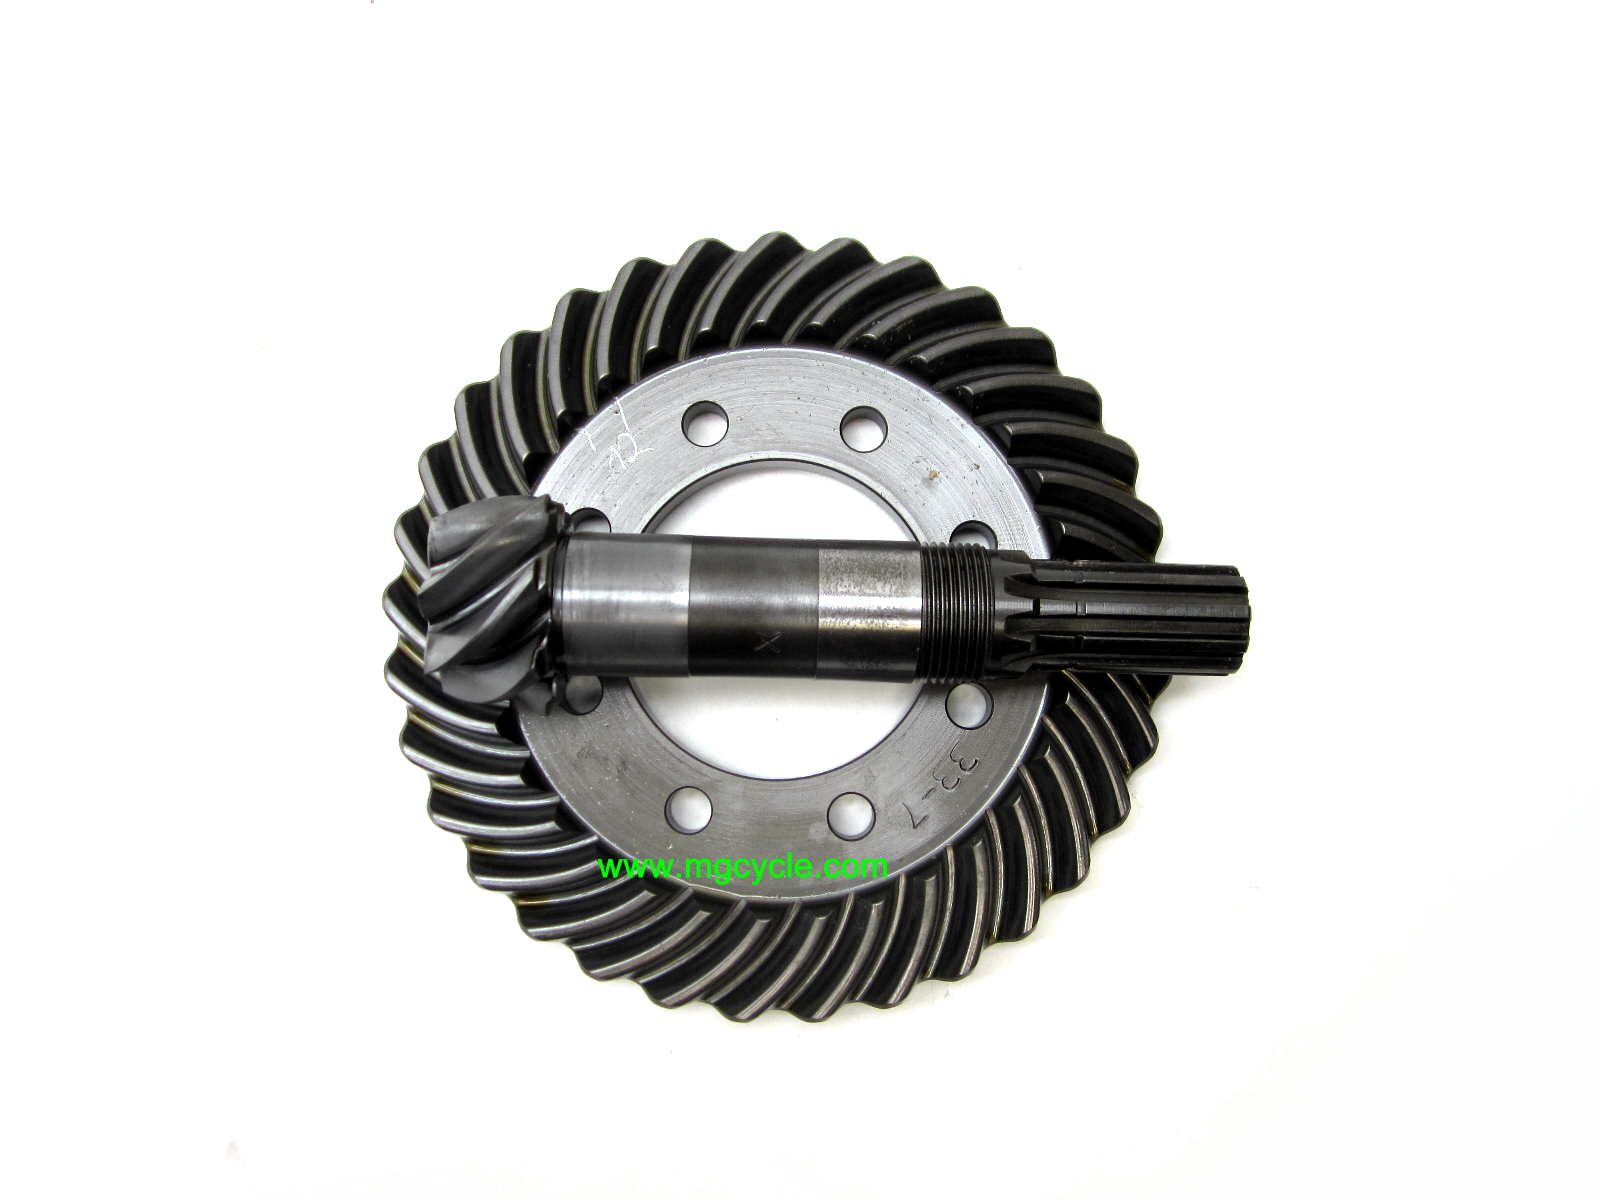 7/33 ring and pinion gear set 1975 to 1993 replaces GU17354650